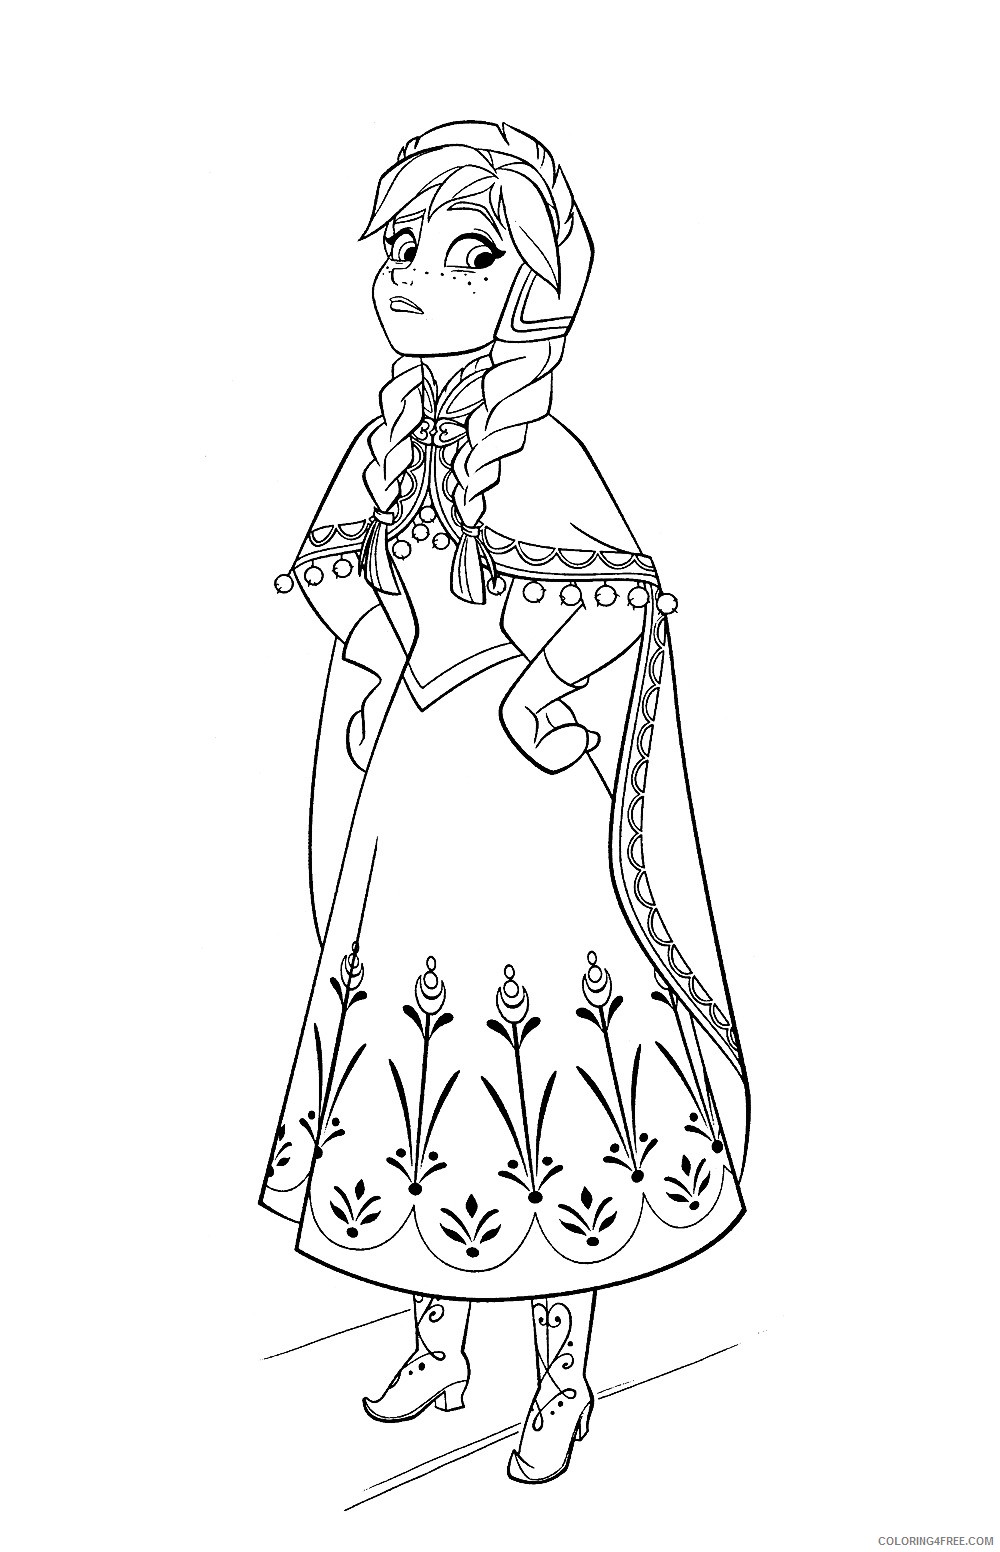 anna coloring pages winter dress Coloring4free